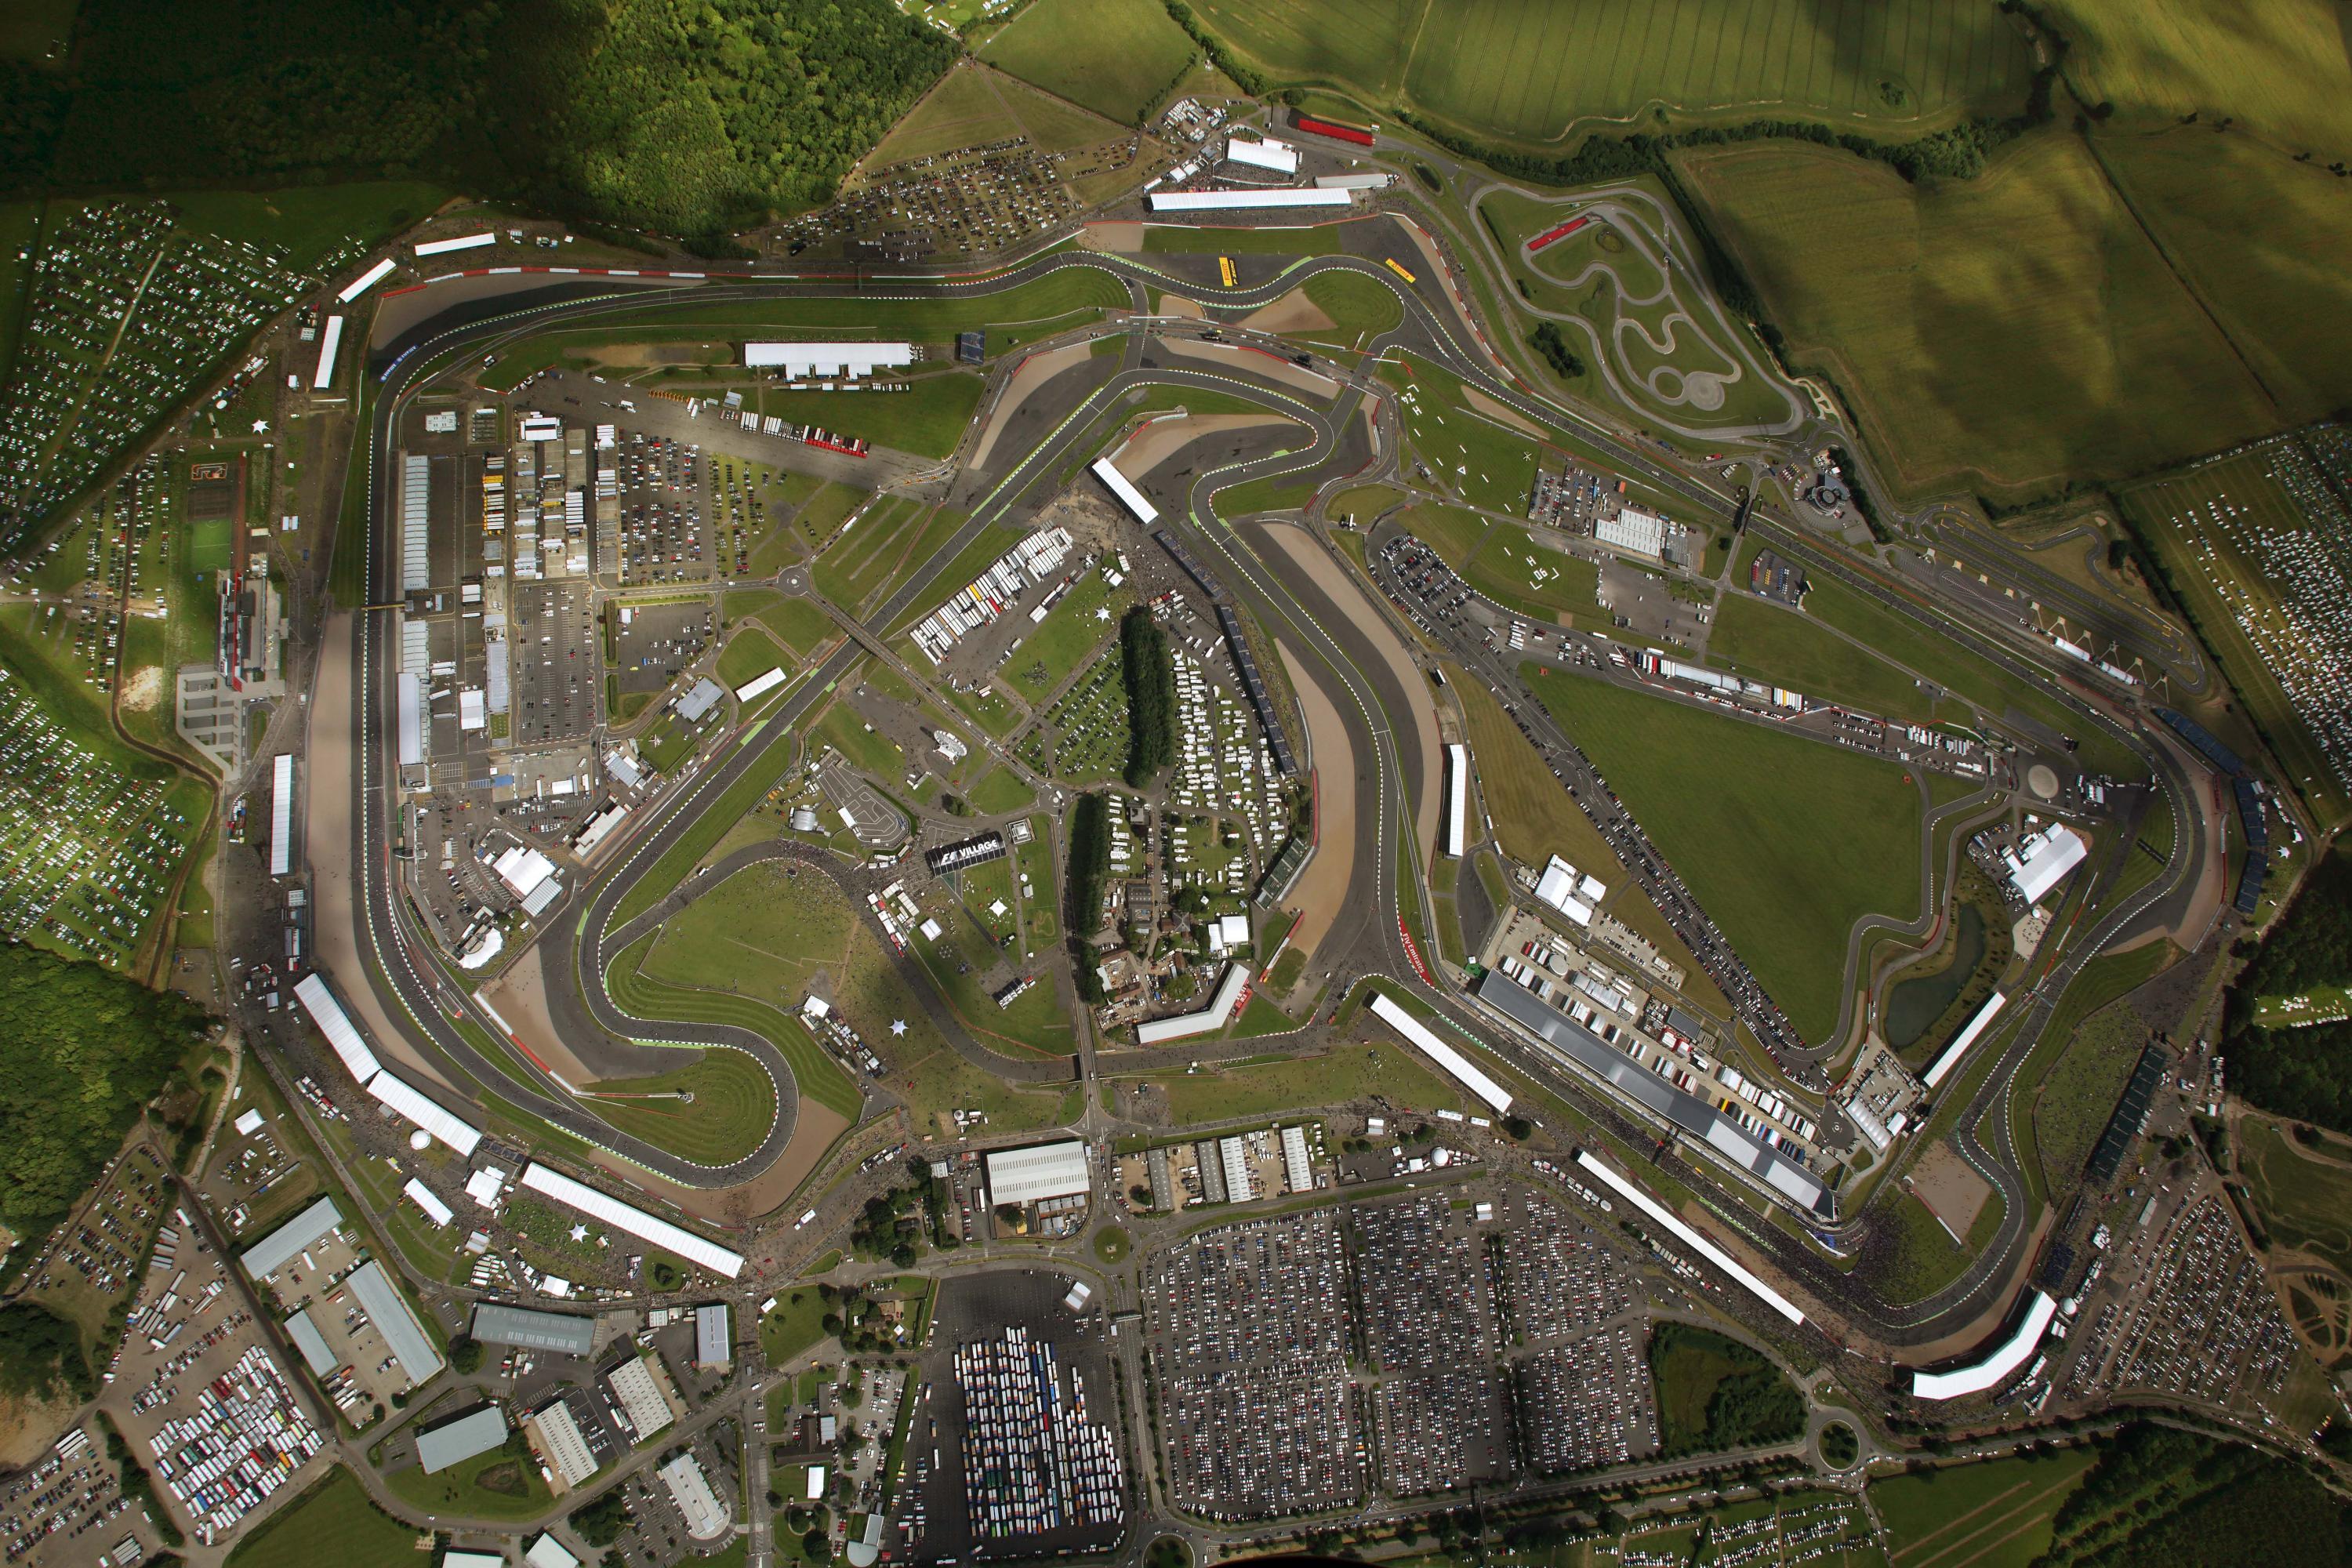 Silverstone aerial view of the circuit